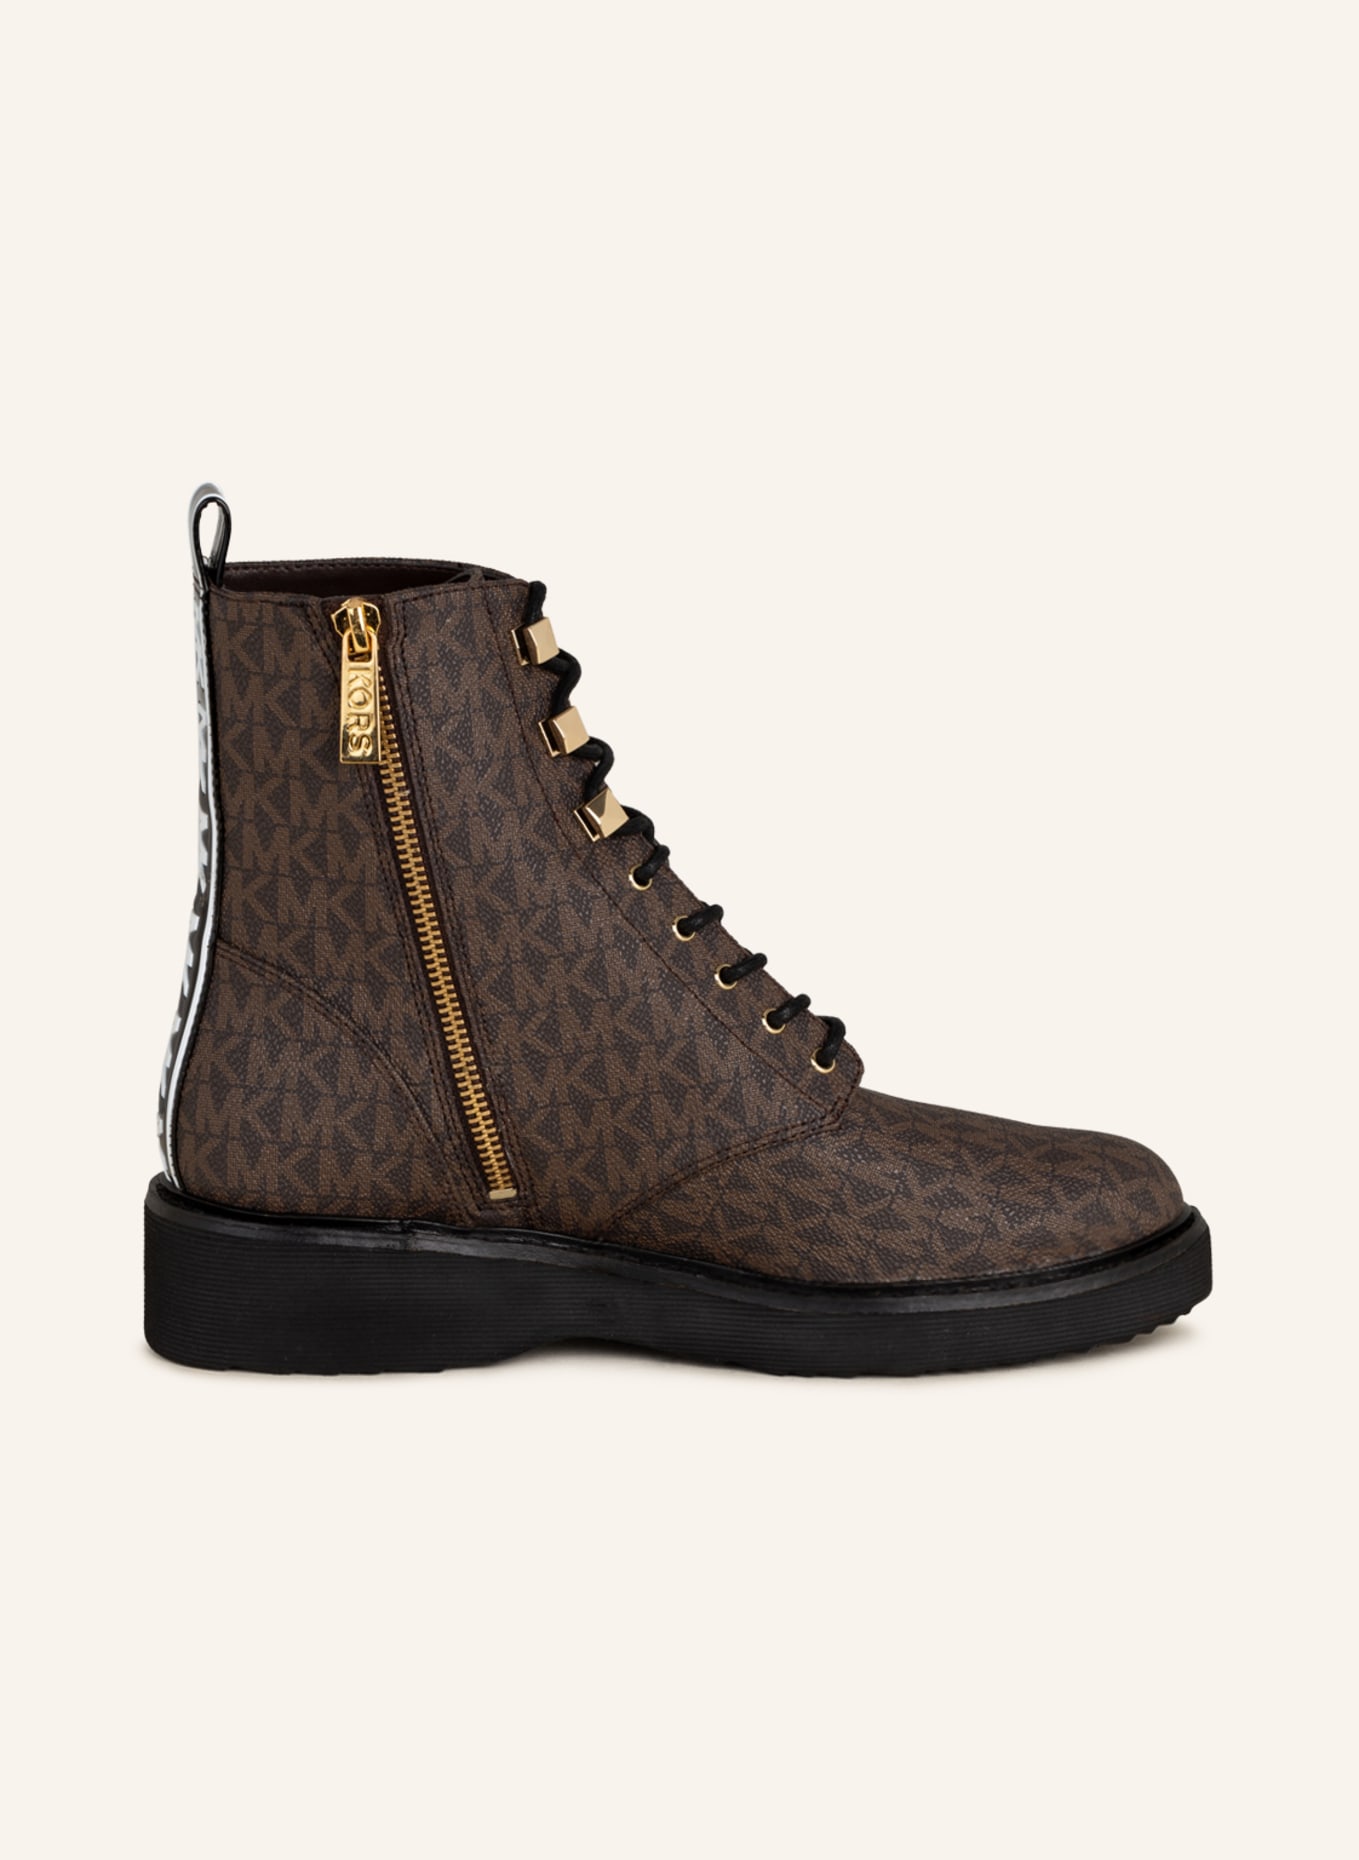 MICHAEL KORS Lace-up boots HASKELL, Color: 200 BROWN (Image 5)